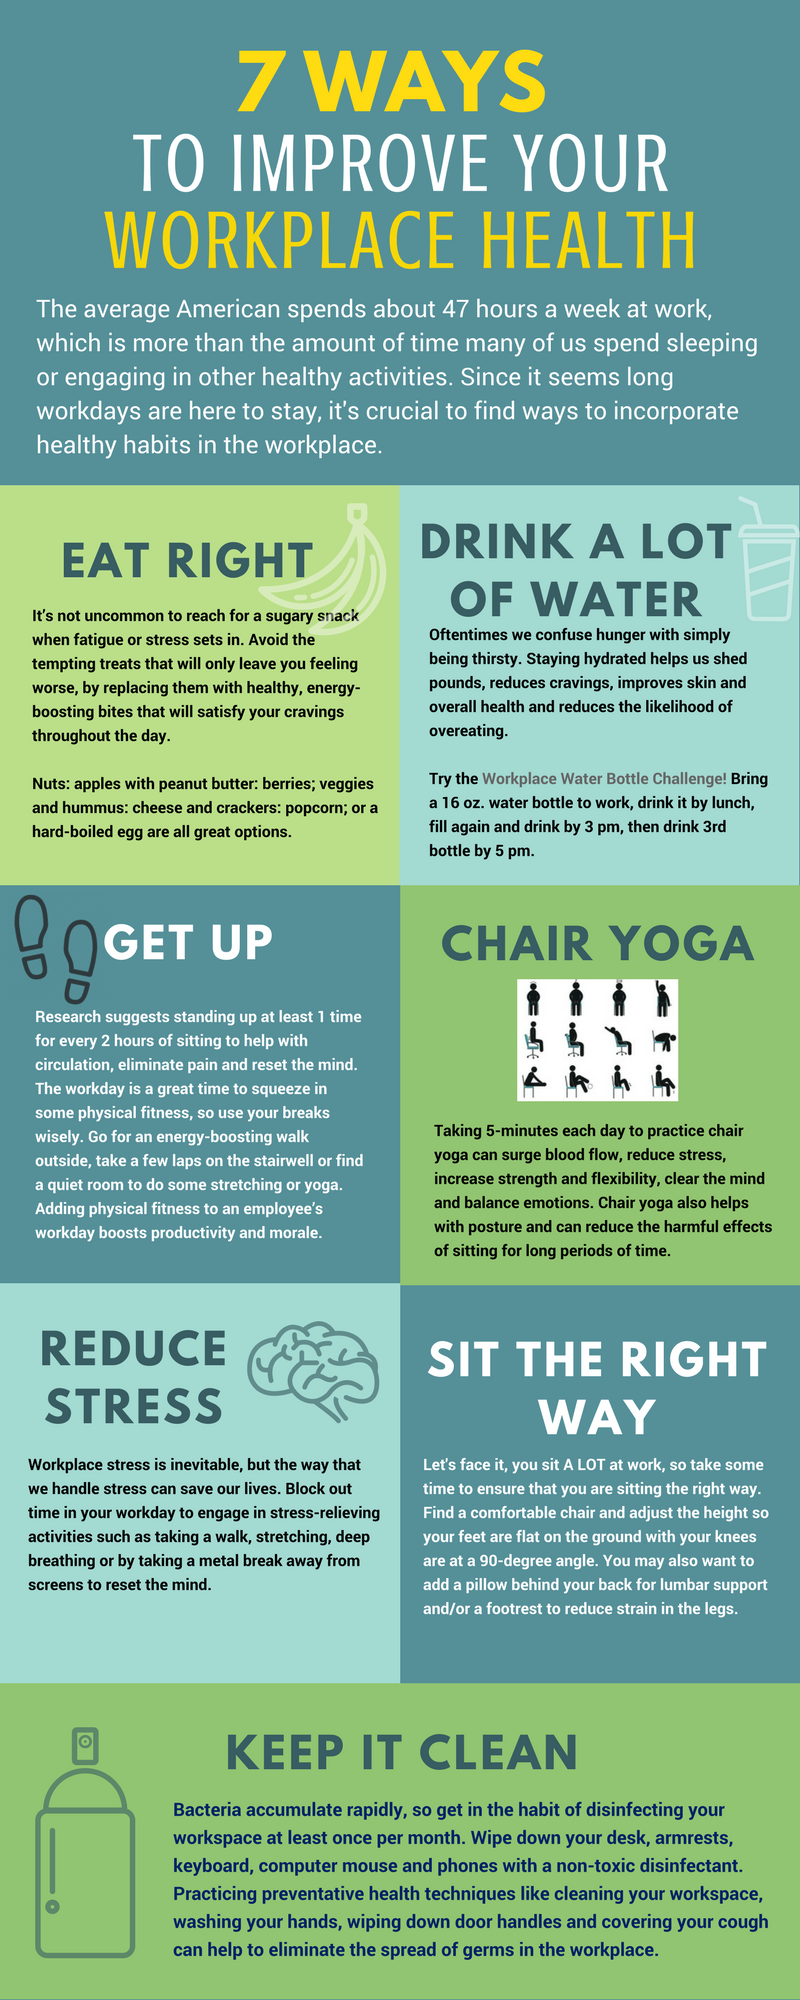 7 Ways to Improve Your Workplace Health infographic